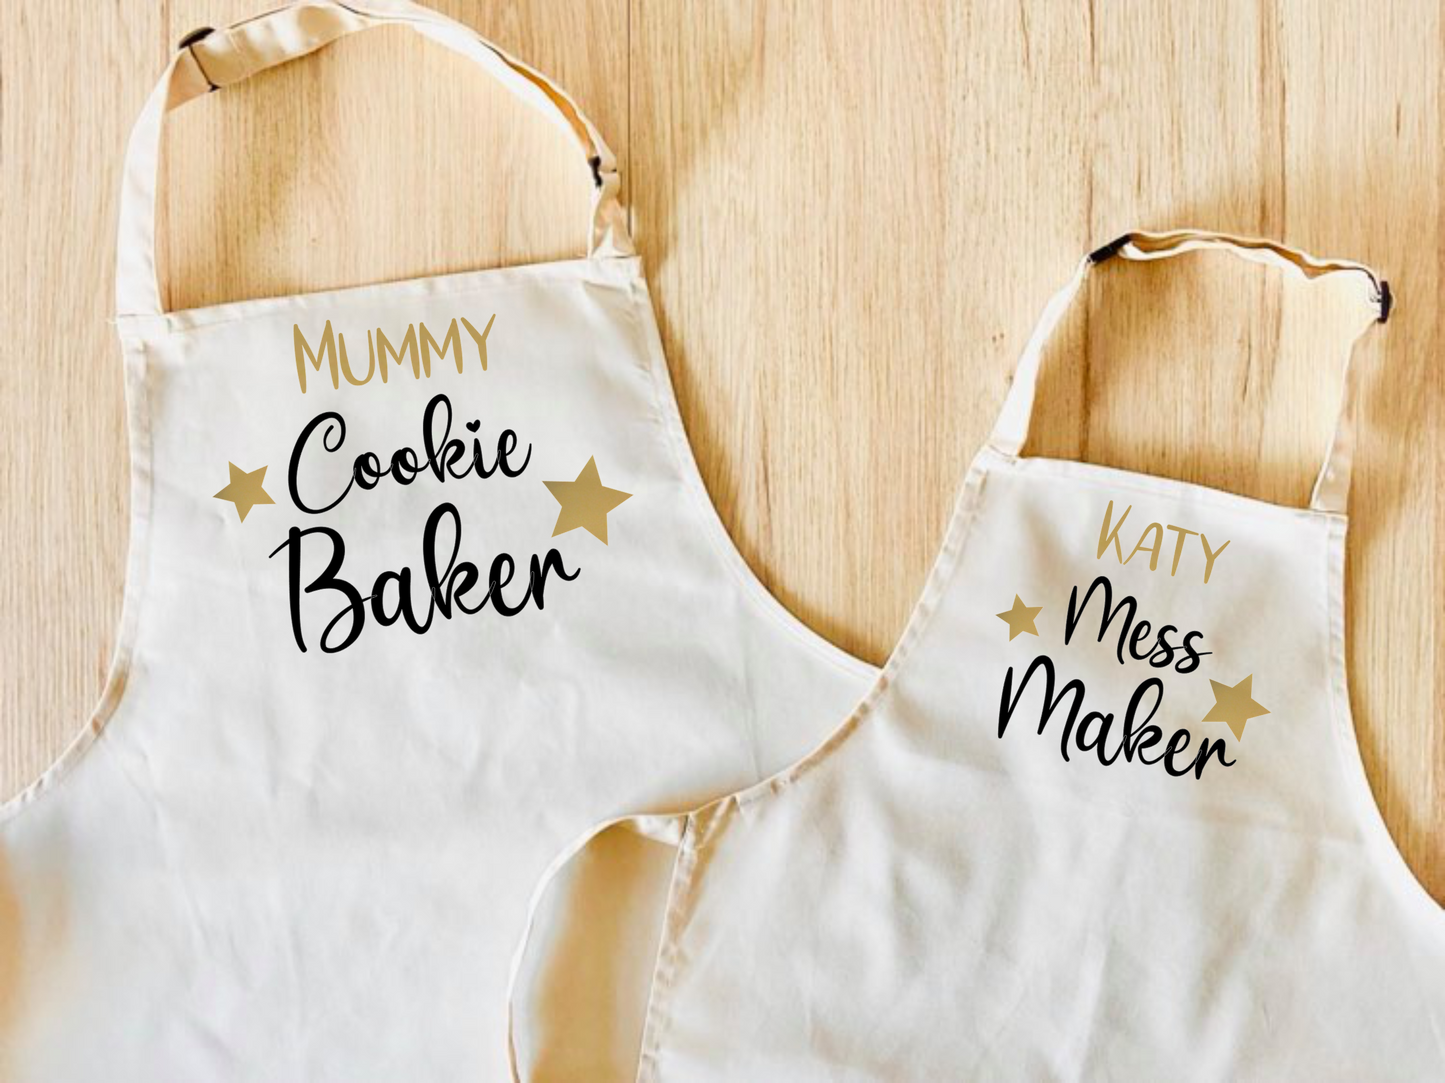 set of 2 personalised aprons in a choice of colours. One has Cookie Baker on it, the other has Mess Maker on it.